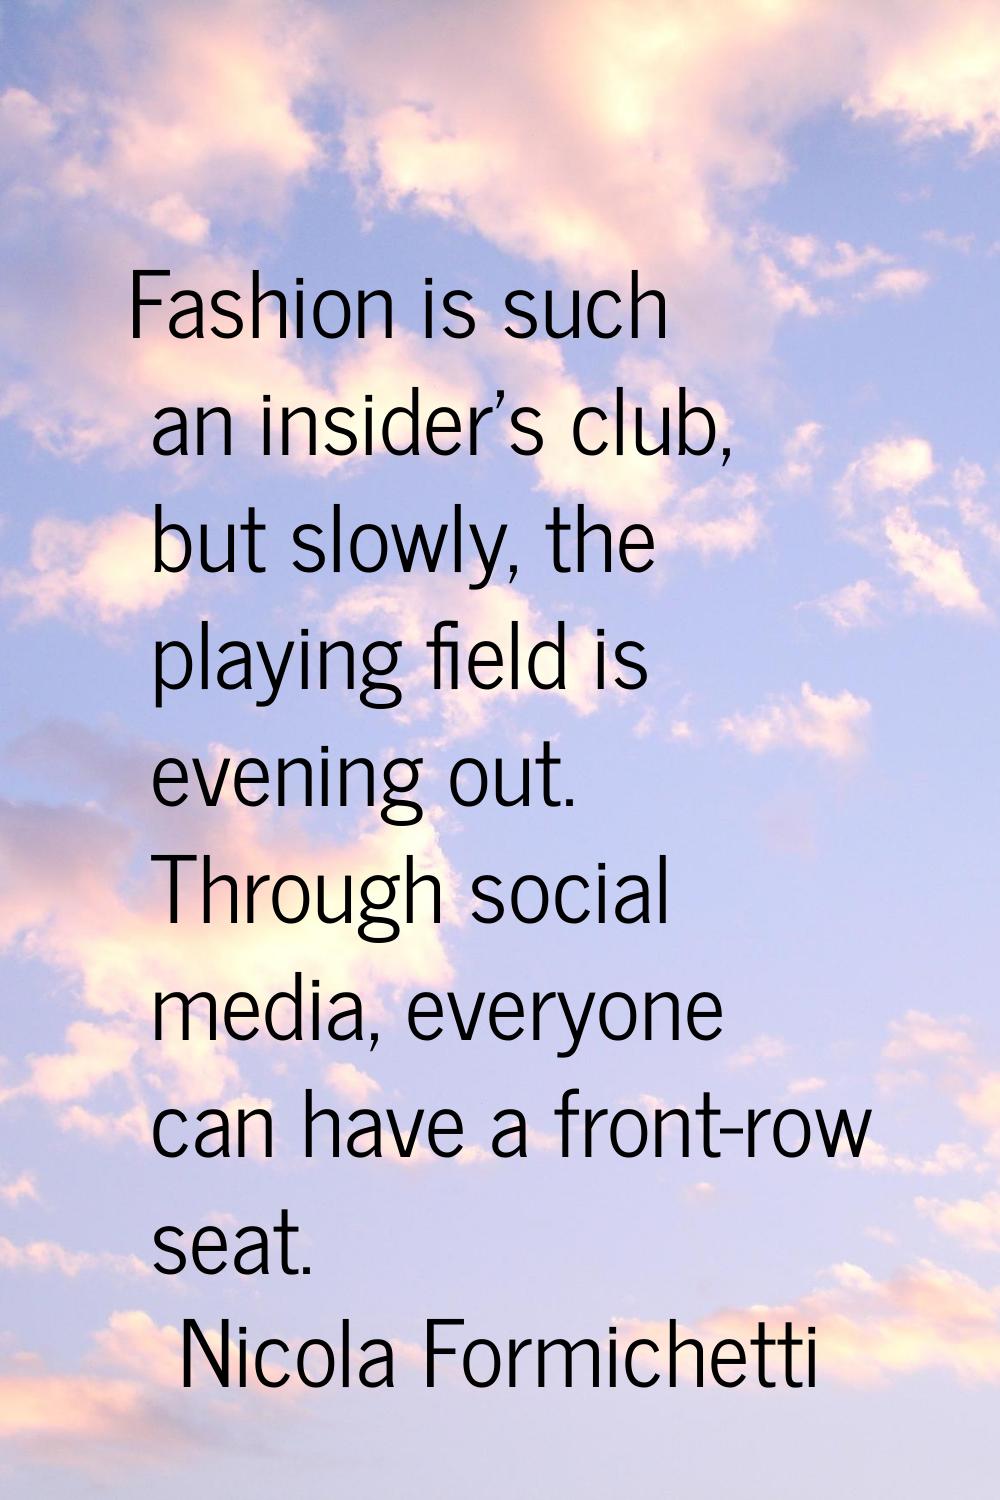 Fashion is such an insider's club, but slowly, the playing field is evening out. Through social med